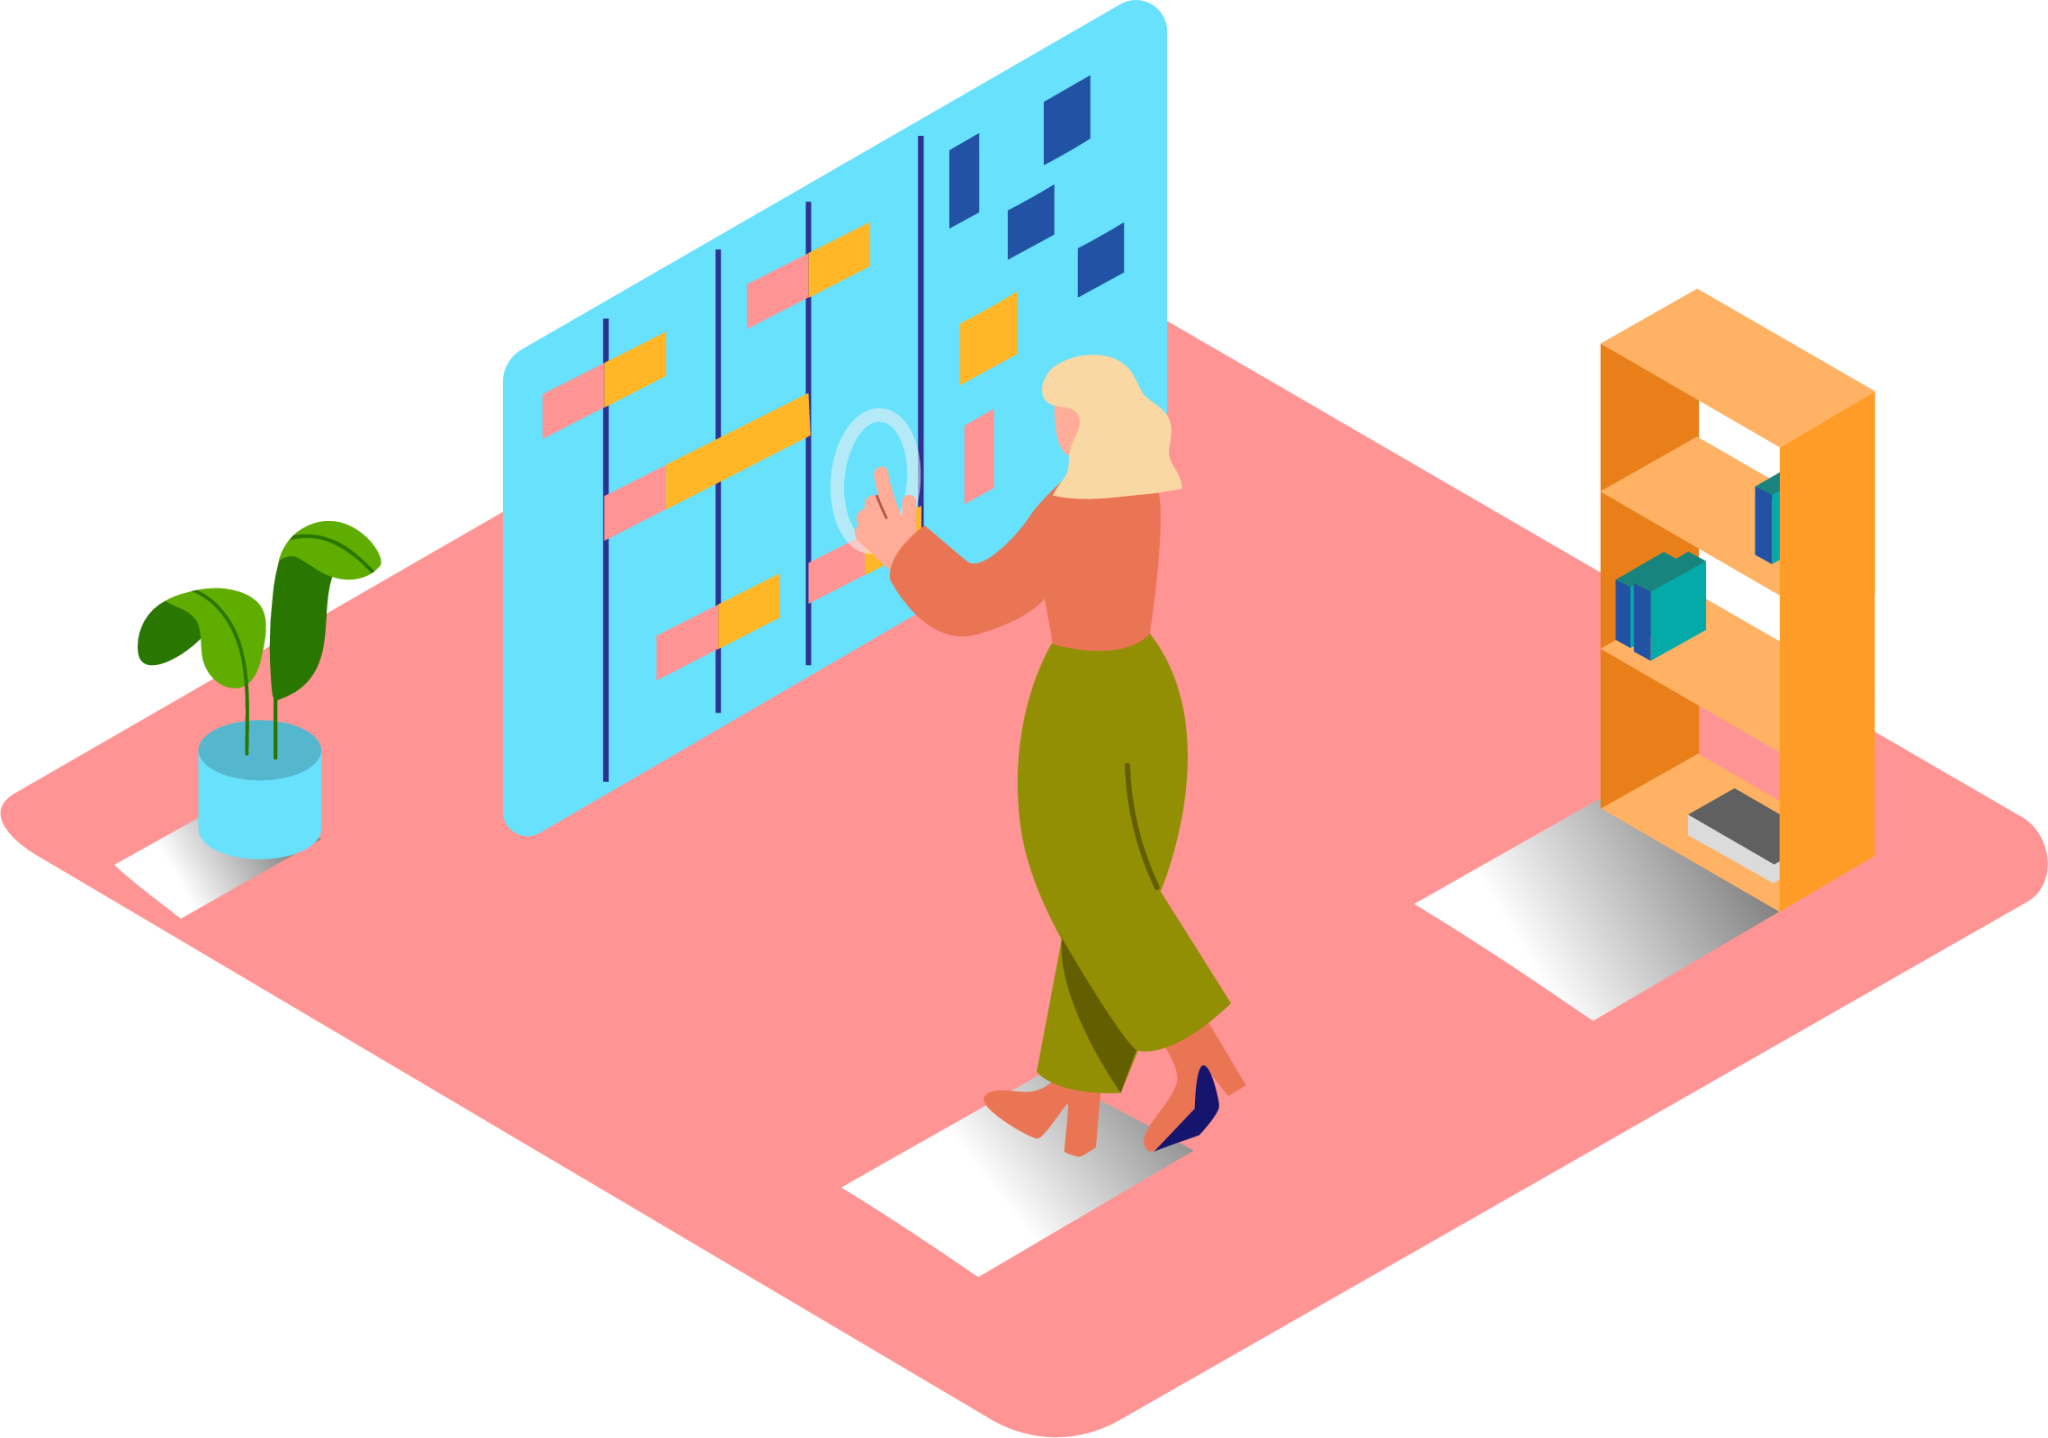 Product Manager illustration